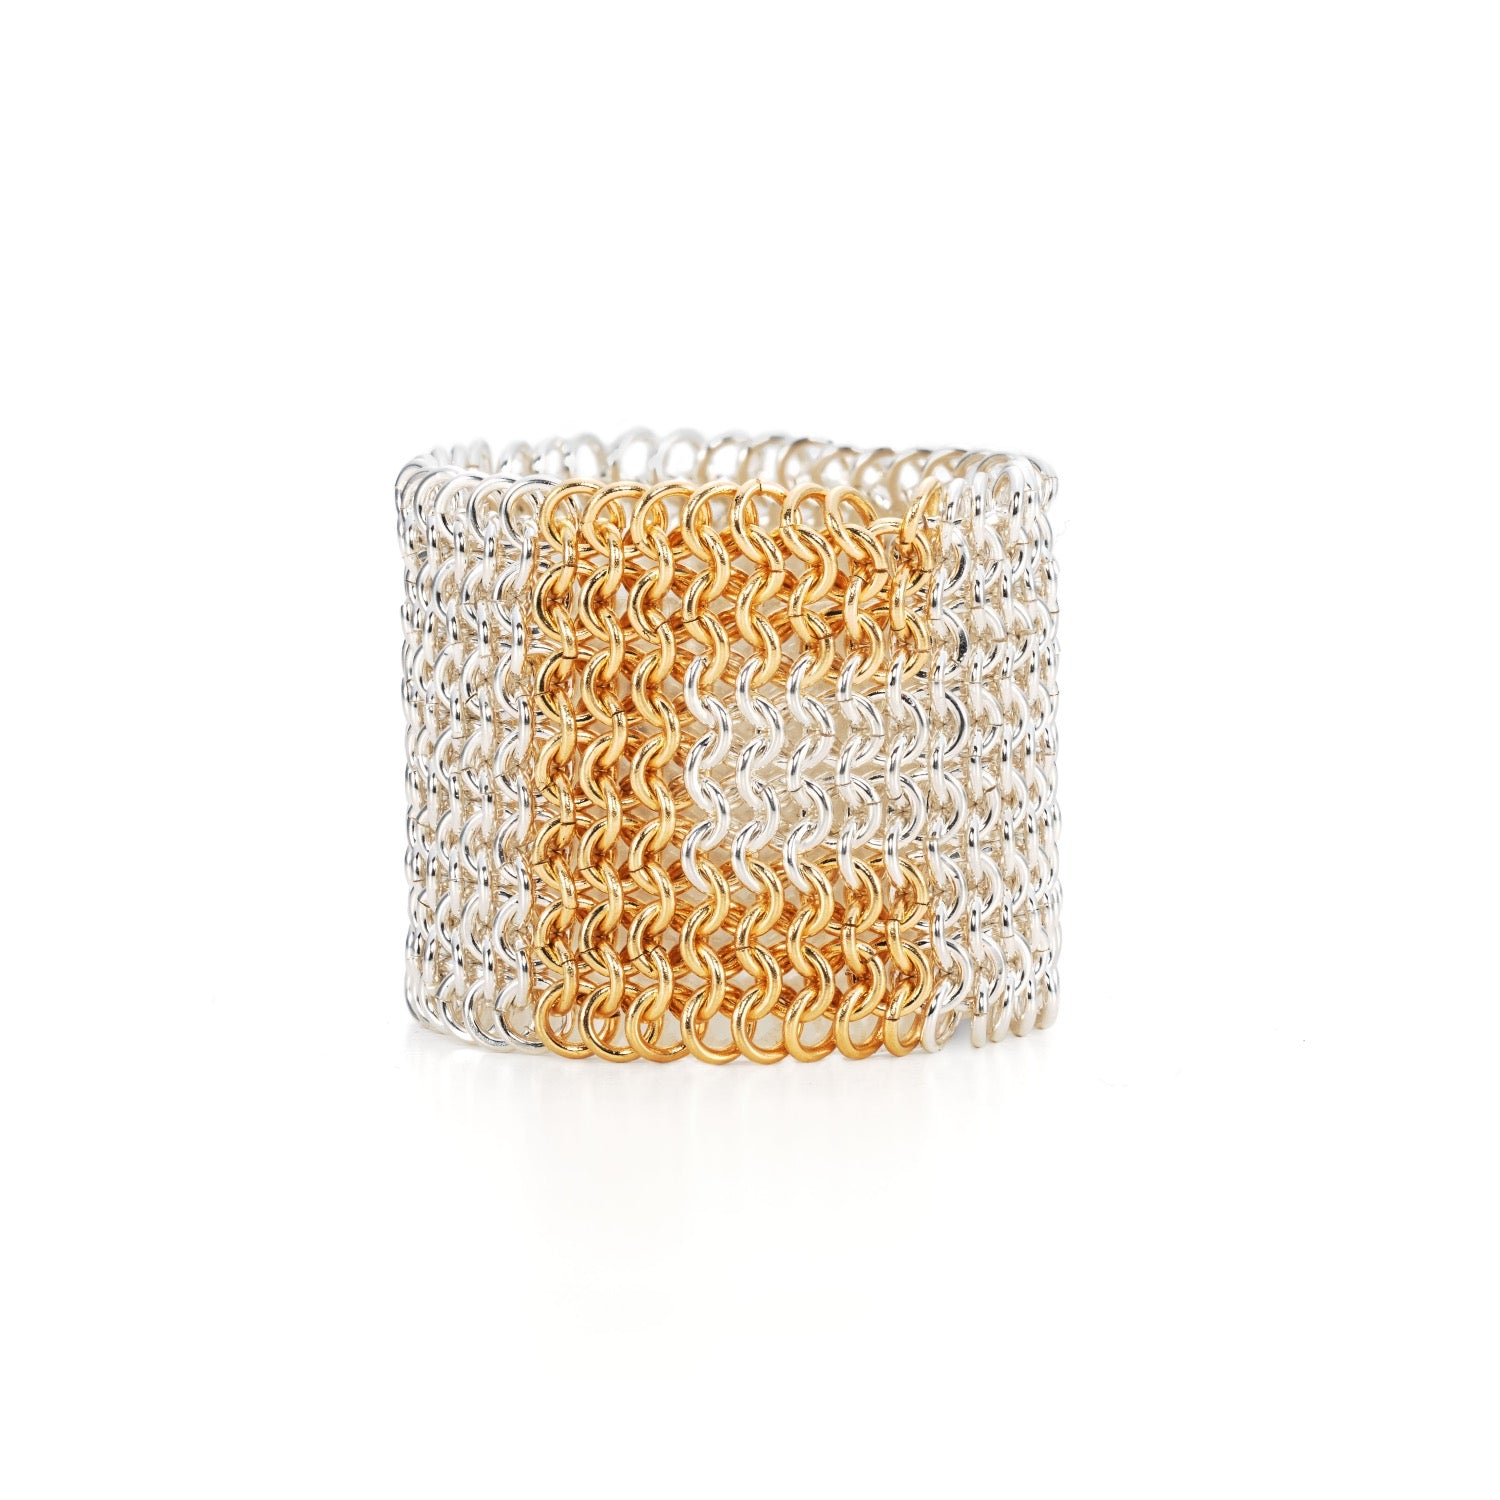 Growan chainmail handmade  ring  in recycled silver and 18ct yellow gold by Corrinne Eira Evans Contemporary Jewellery  women's chain ring mens chain ring